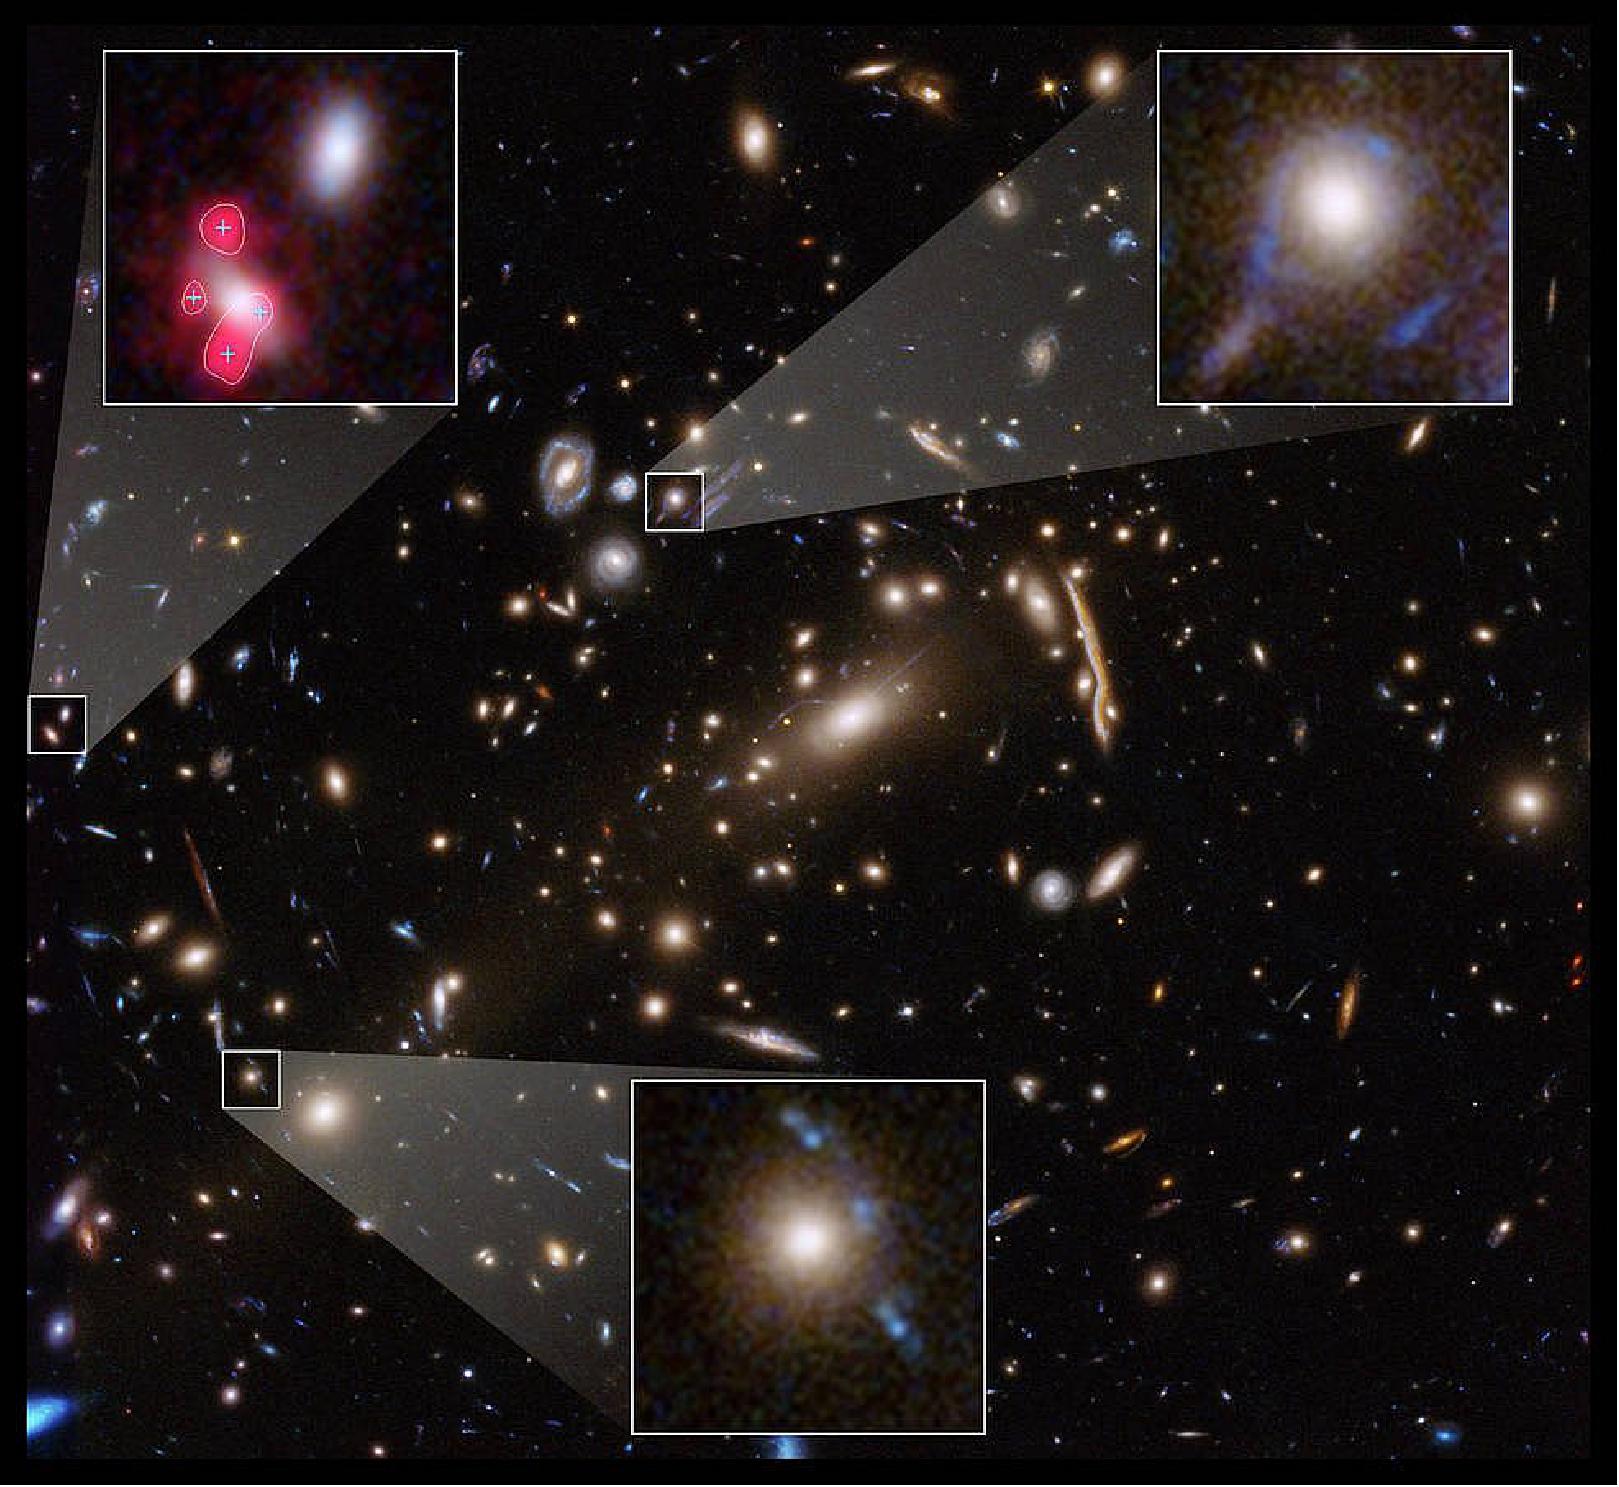 Figure 32: This Hubble Space Telescope image shows the massive galaxy cluster MACS J1206. Embedded within the cluster are the distorted images of distant background galaxies, seen as arcs and smeared features. These distortions are caused by the amount of dark matter in the cluster, whose gravity bends and magnifies the light from faraway galaxies. This effect, called gravitational lensing, allows astronomers to study remote galaxies that would otherwise be too faint to see. Several of the cluster galaxies are sufficiently massive and dense to also distort and magnify faraway sources. The galaxies in the three pullouts represent examples of such effects. In the snapshots at upper right and bottom, two distant, blue galaxies are lensed by the foreground, redder cluster galaxies, forming rings and multiple images of the remote objects. The red blobs around the galaxy at upper left denote emission from clouds of hydrogen in a single distant source. The source, seen four times because of lensing, may be a faint galaxy. These blobs were detected by the Multi-Unit Spectroscopic Explorer (MUSE) at the European Southern Observatory's Very Large Telescope (VLT) in Chile. The blobs do not appear in the Hubble images. MACS J1206 is part of the Cluster Lensing And Supernova survey with Hubble (CLASH) and is one of three galaxy clusters the researchers studied with Hubble and the VLT. The Hubble image is a combination of visible- and infrared-light observations taken in 2011 by the Advanced Camera for Surveys and Wide Field Camera 3 (image credits: NASA, ESA, P. Natarajan (Yale University), G. Caminha (University of Groningen), M. Meneghetti (INAF-Observatory of Astrophysics and Space Science of Bologna), the CLASH-VLT/Zooming teams; acknowledgment: NASA, ESA, M. Postman (STScI), the CLASH team)